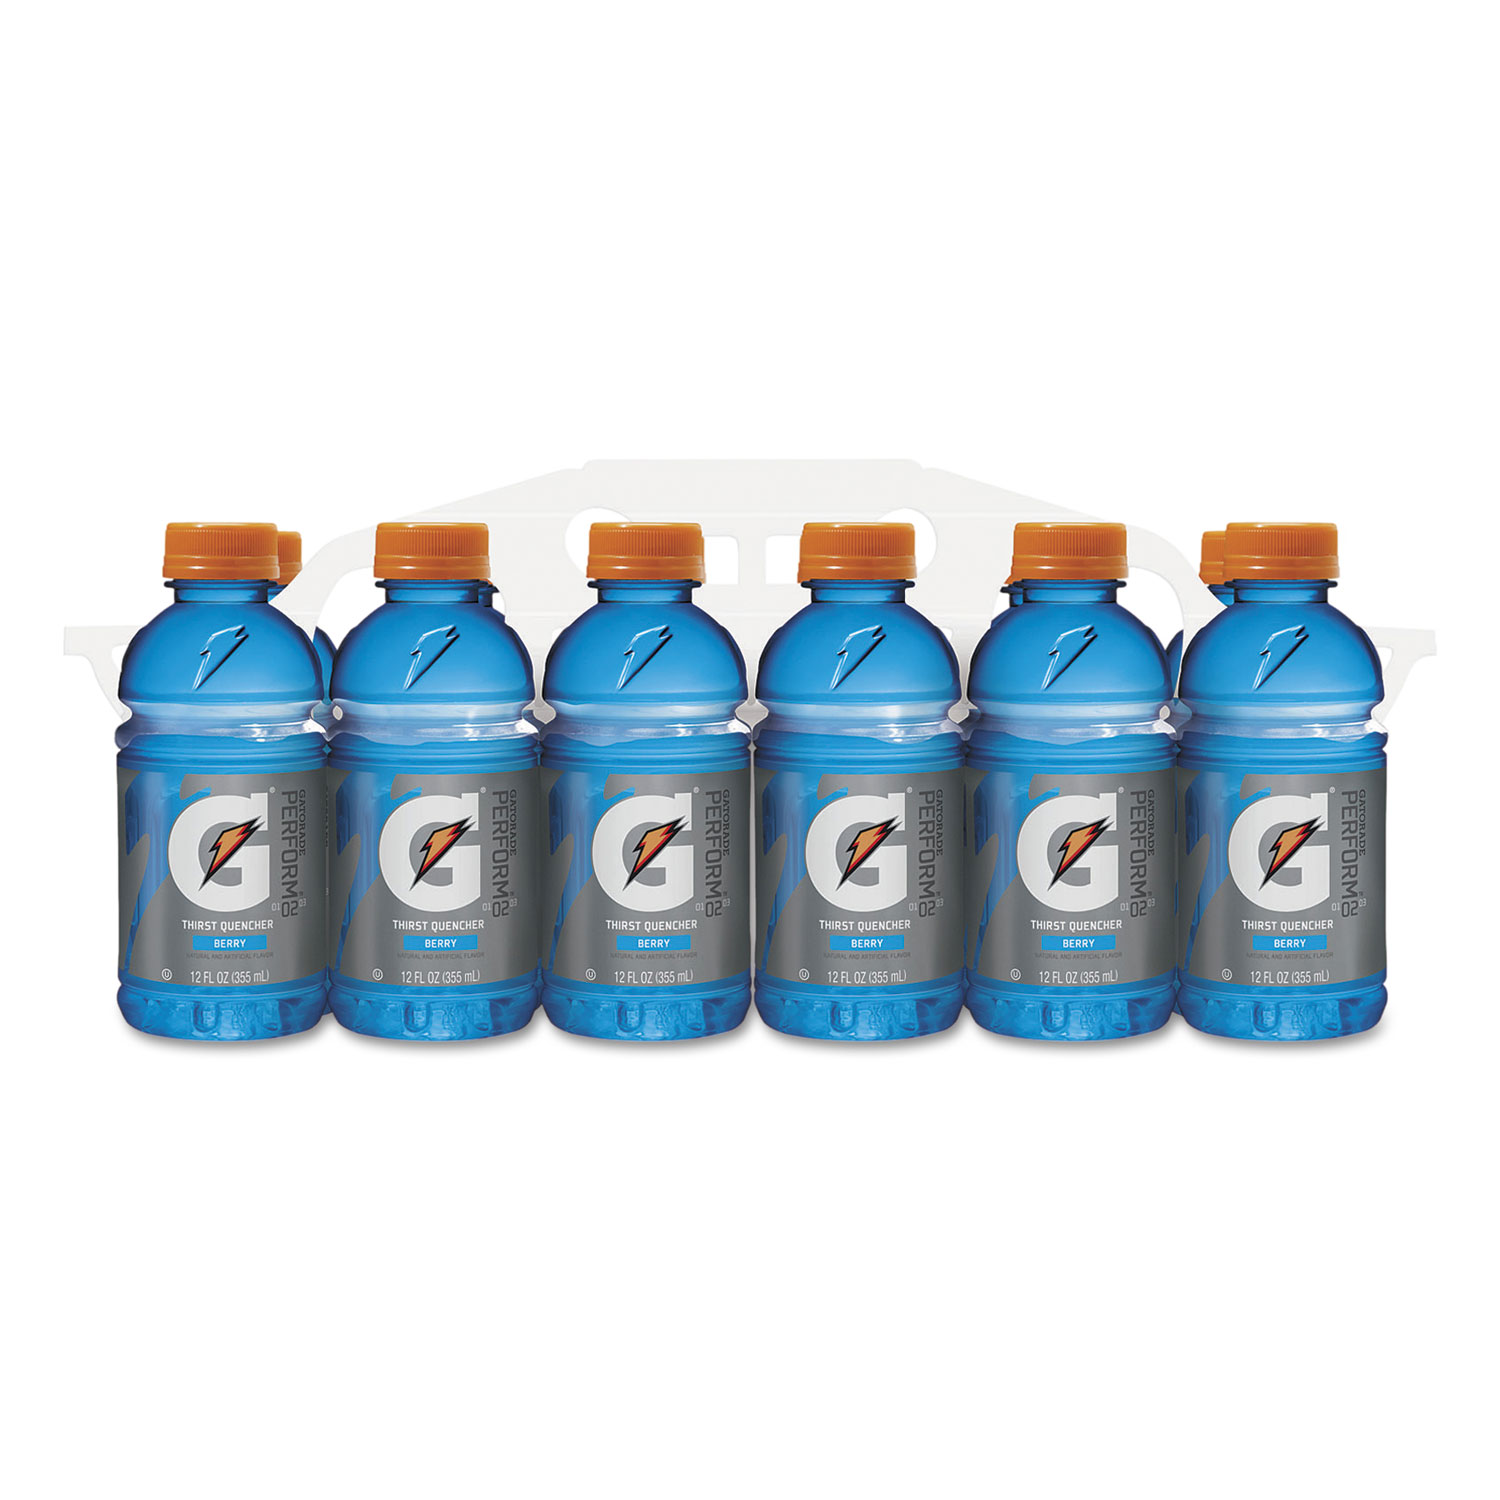 G-Series Perform 02 Thirst Quencher, Berry, 12 oz Bottle, 24/Carton